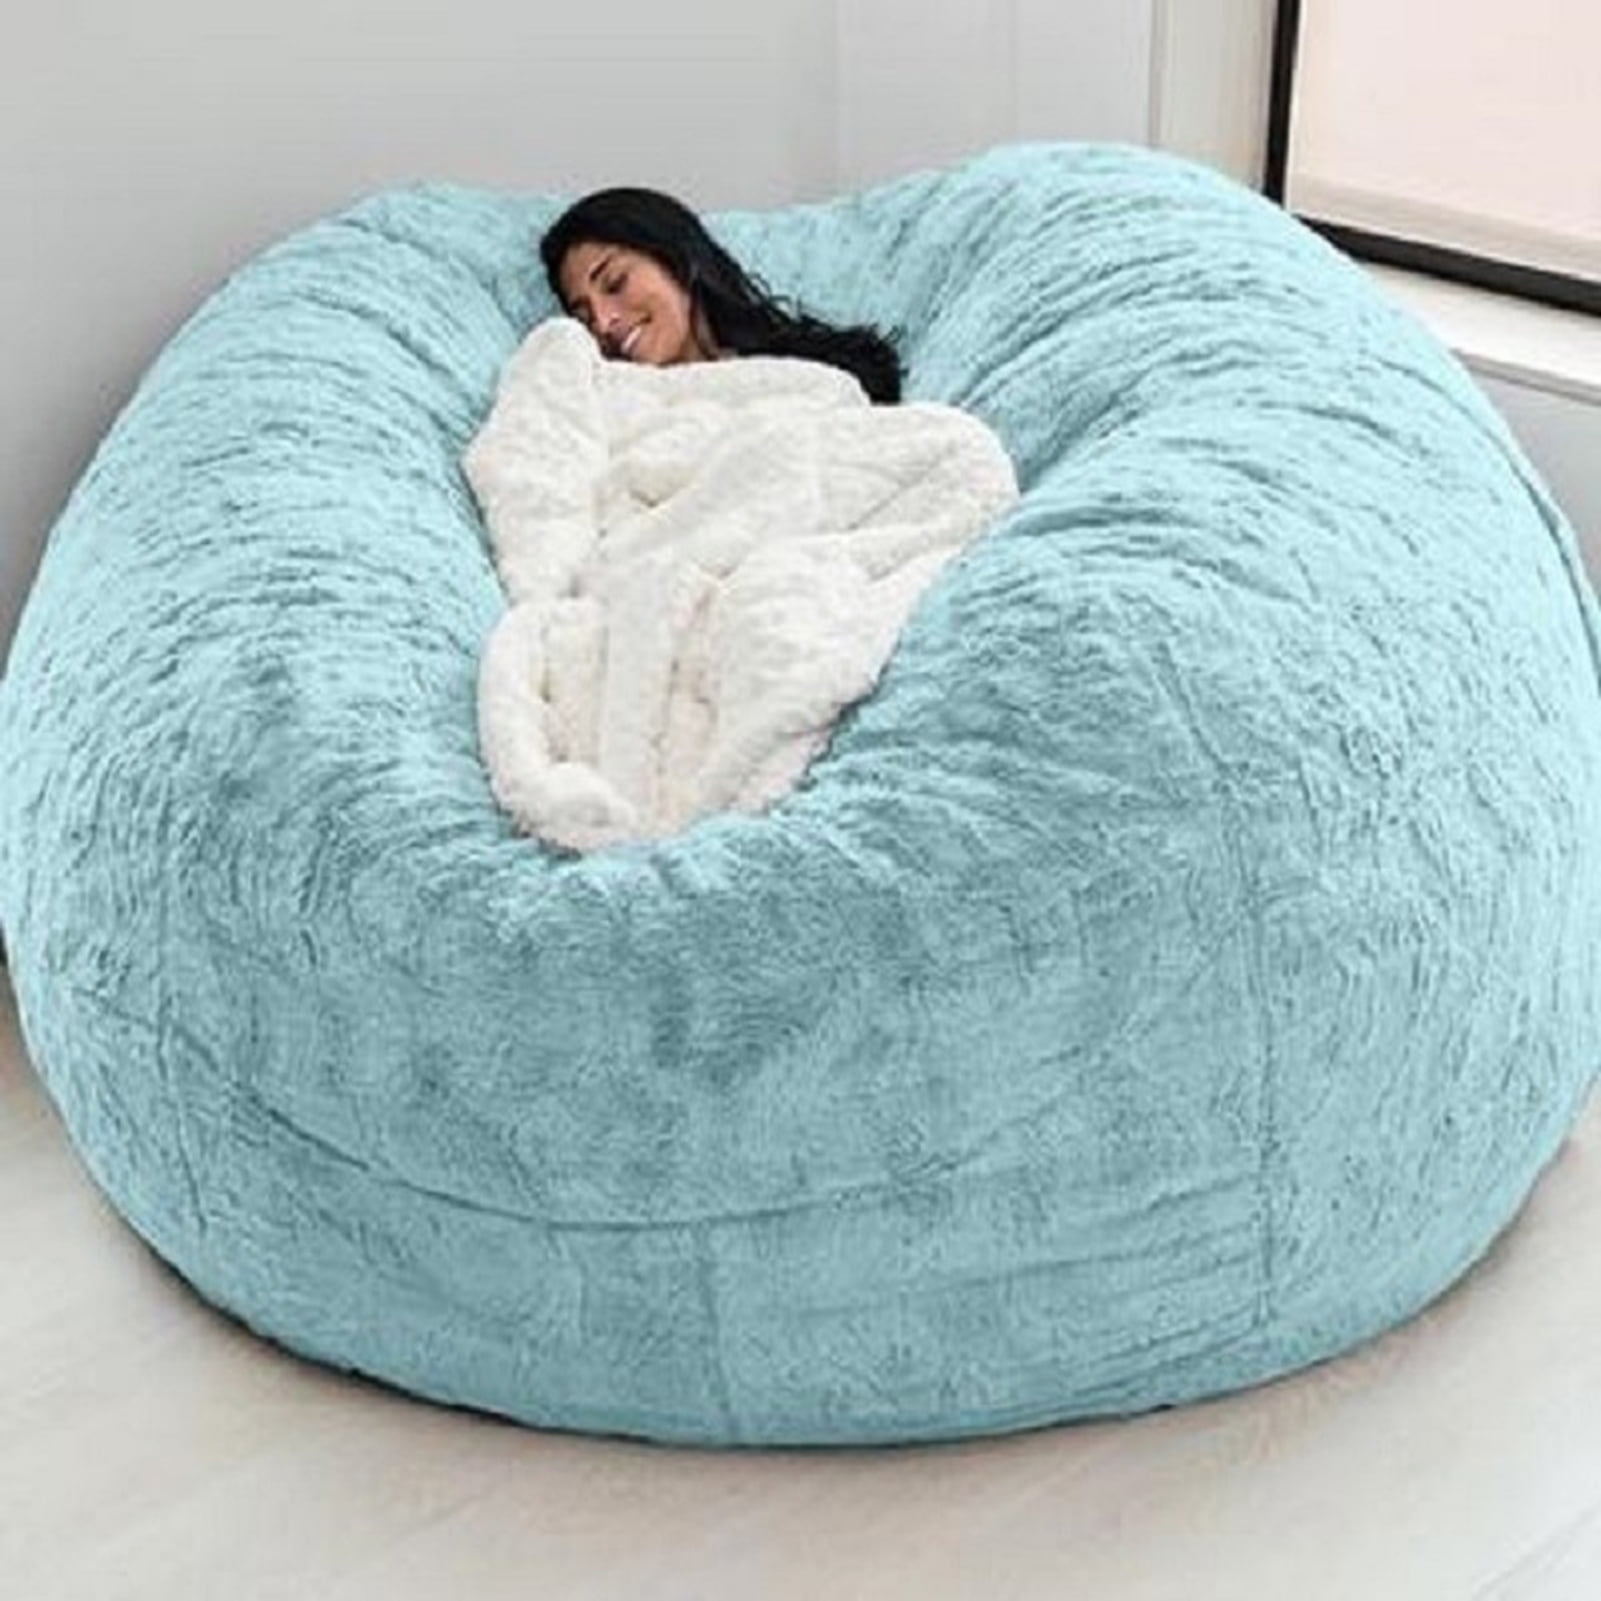 Leatherette Bean Bag Cover Filling Not Included by Ample Decor - On Sale -  Bed Bath & Beyond - 26442912